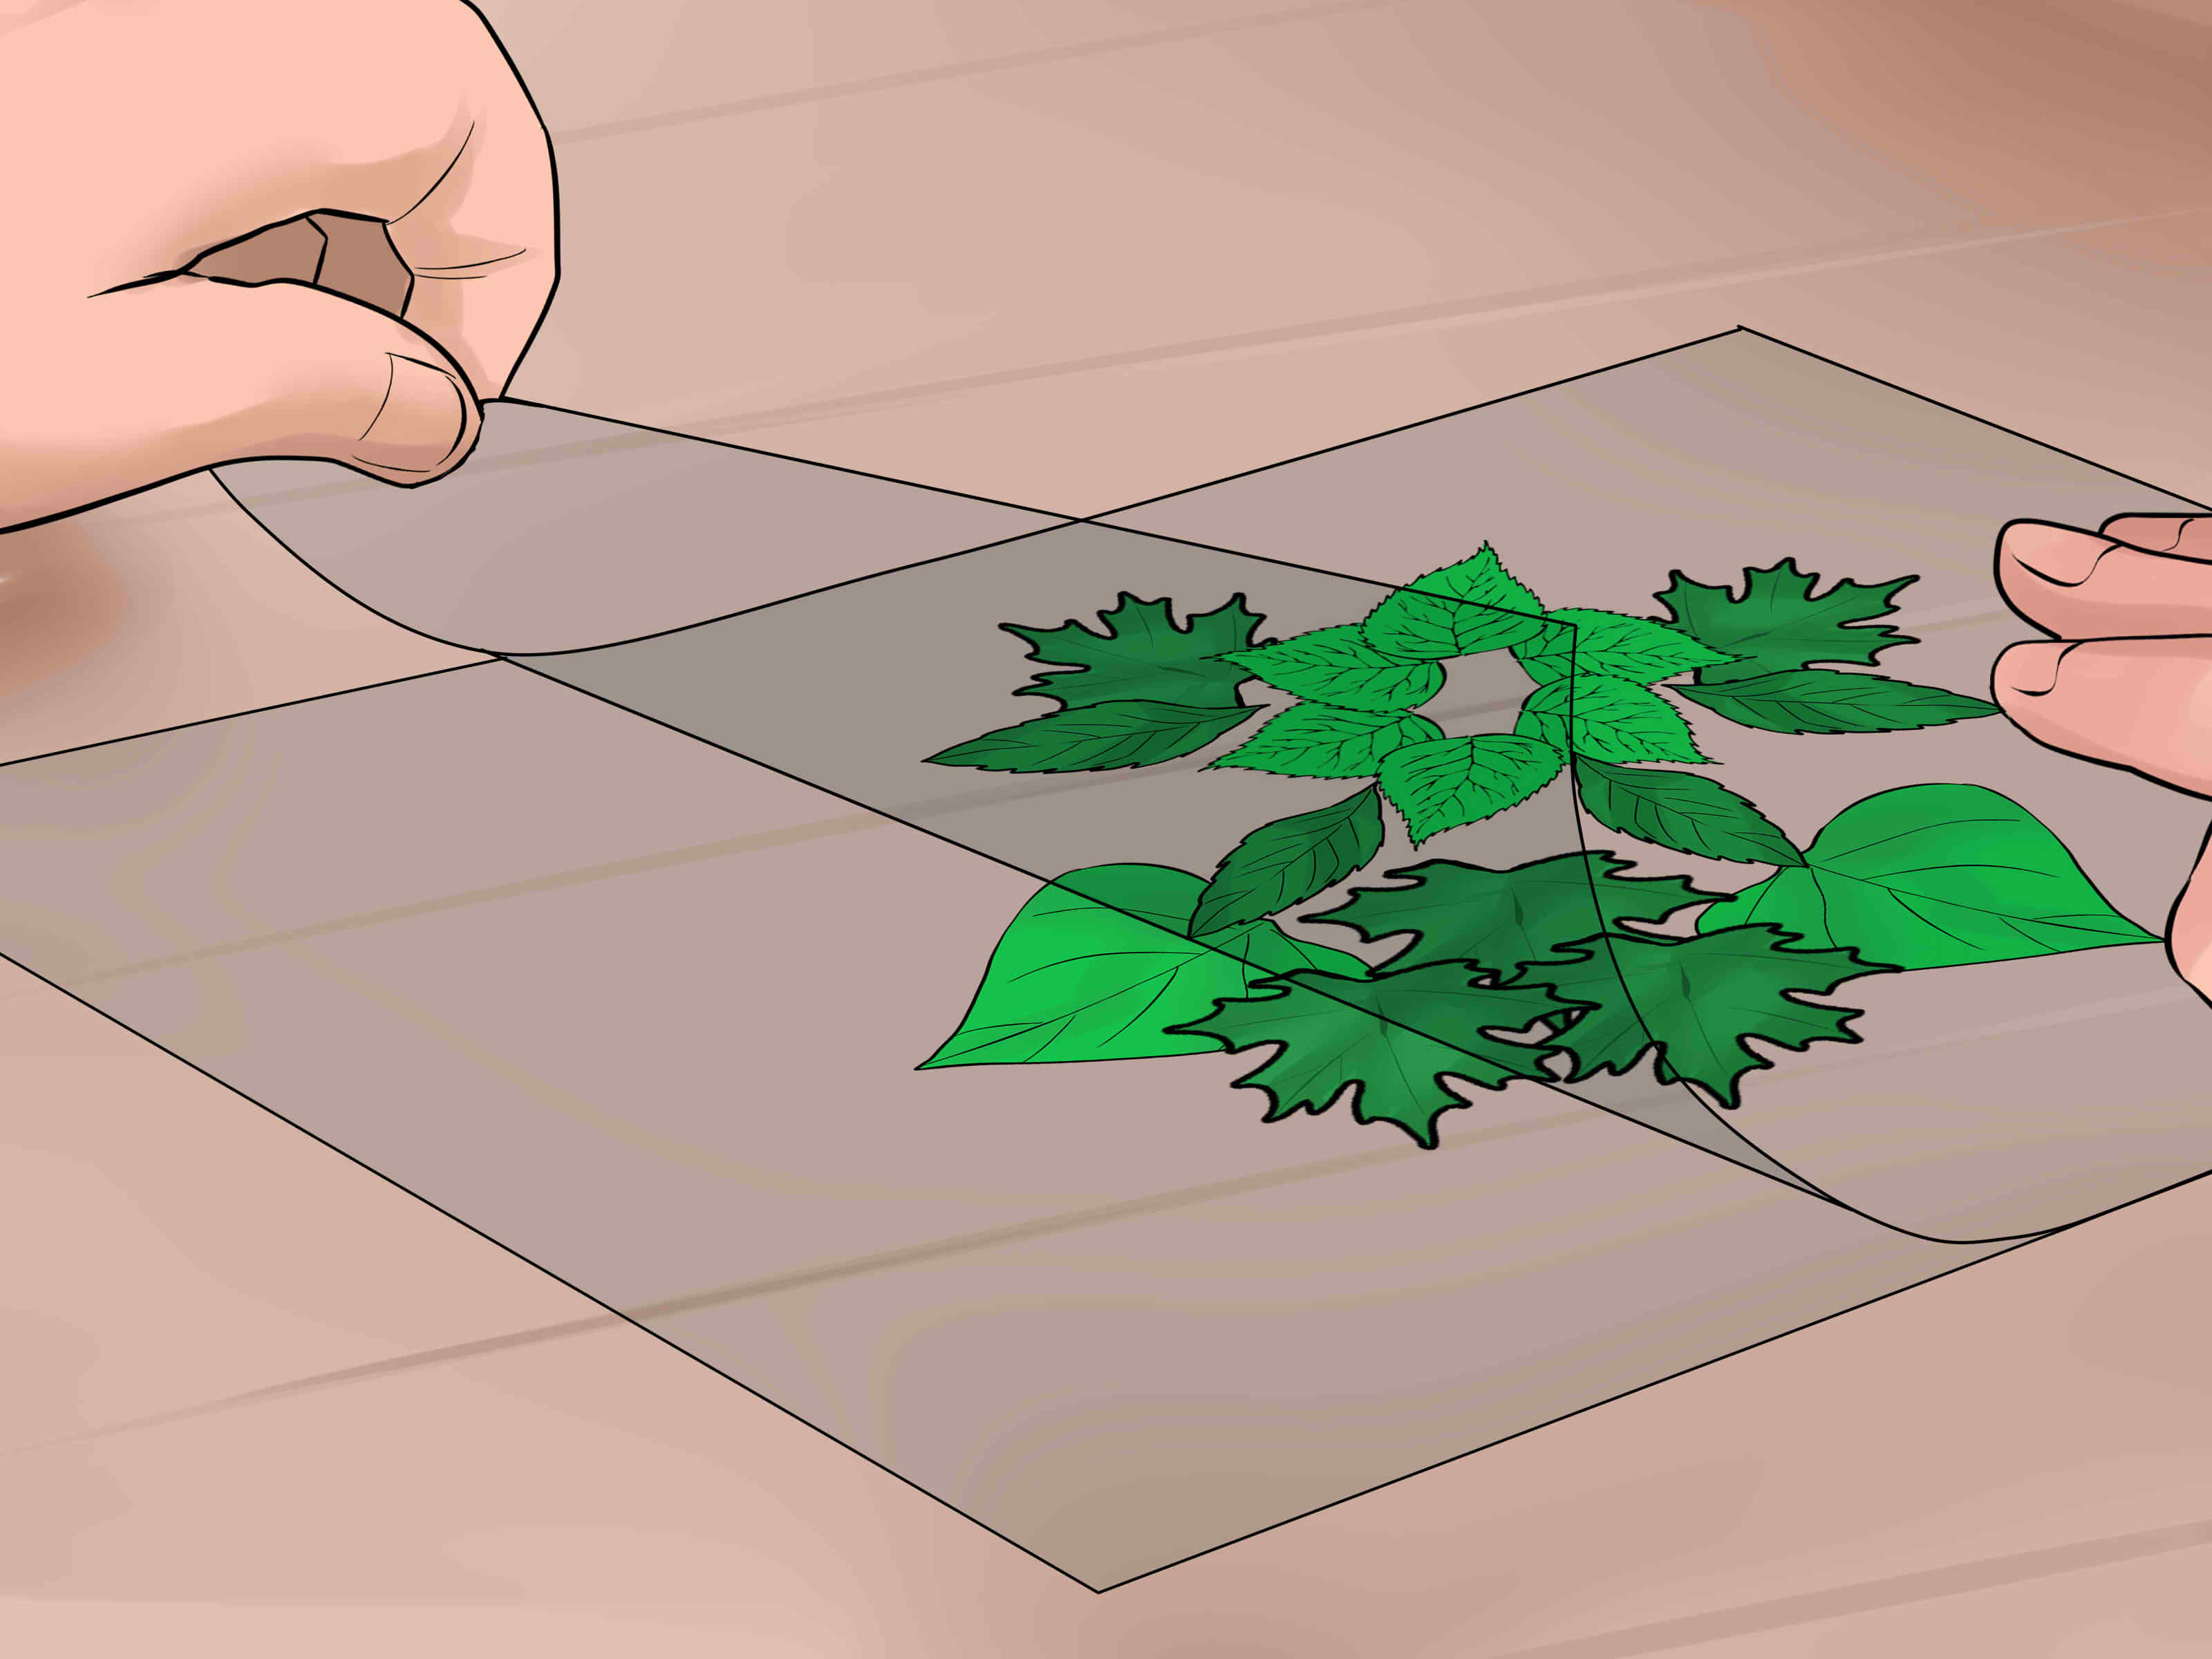 3 Ways to Make a Leaf Collage - wikiHow